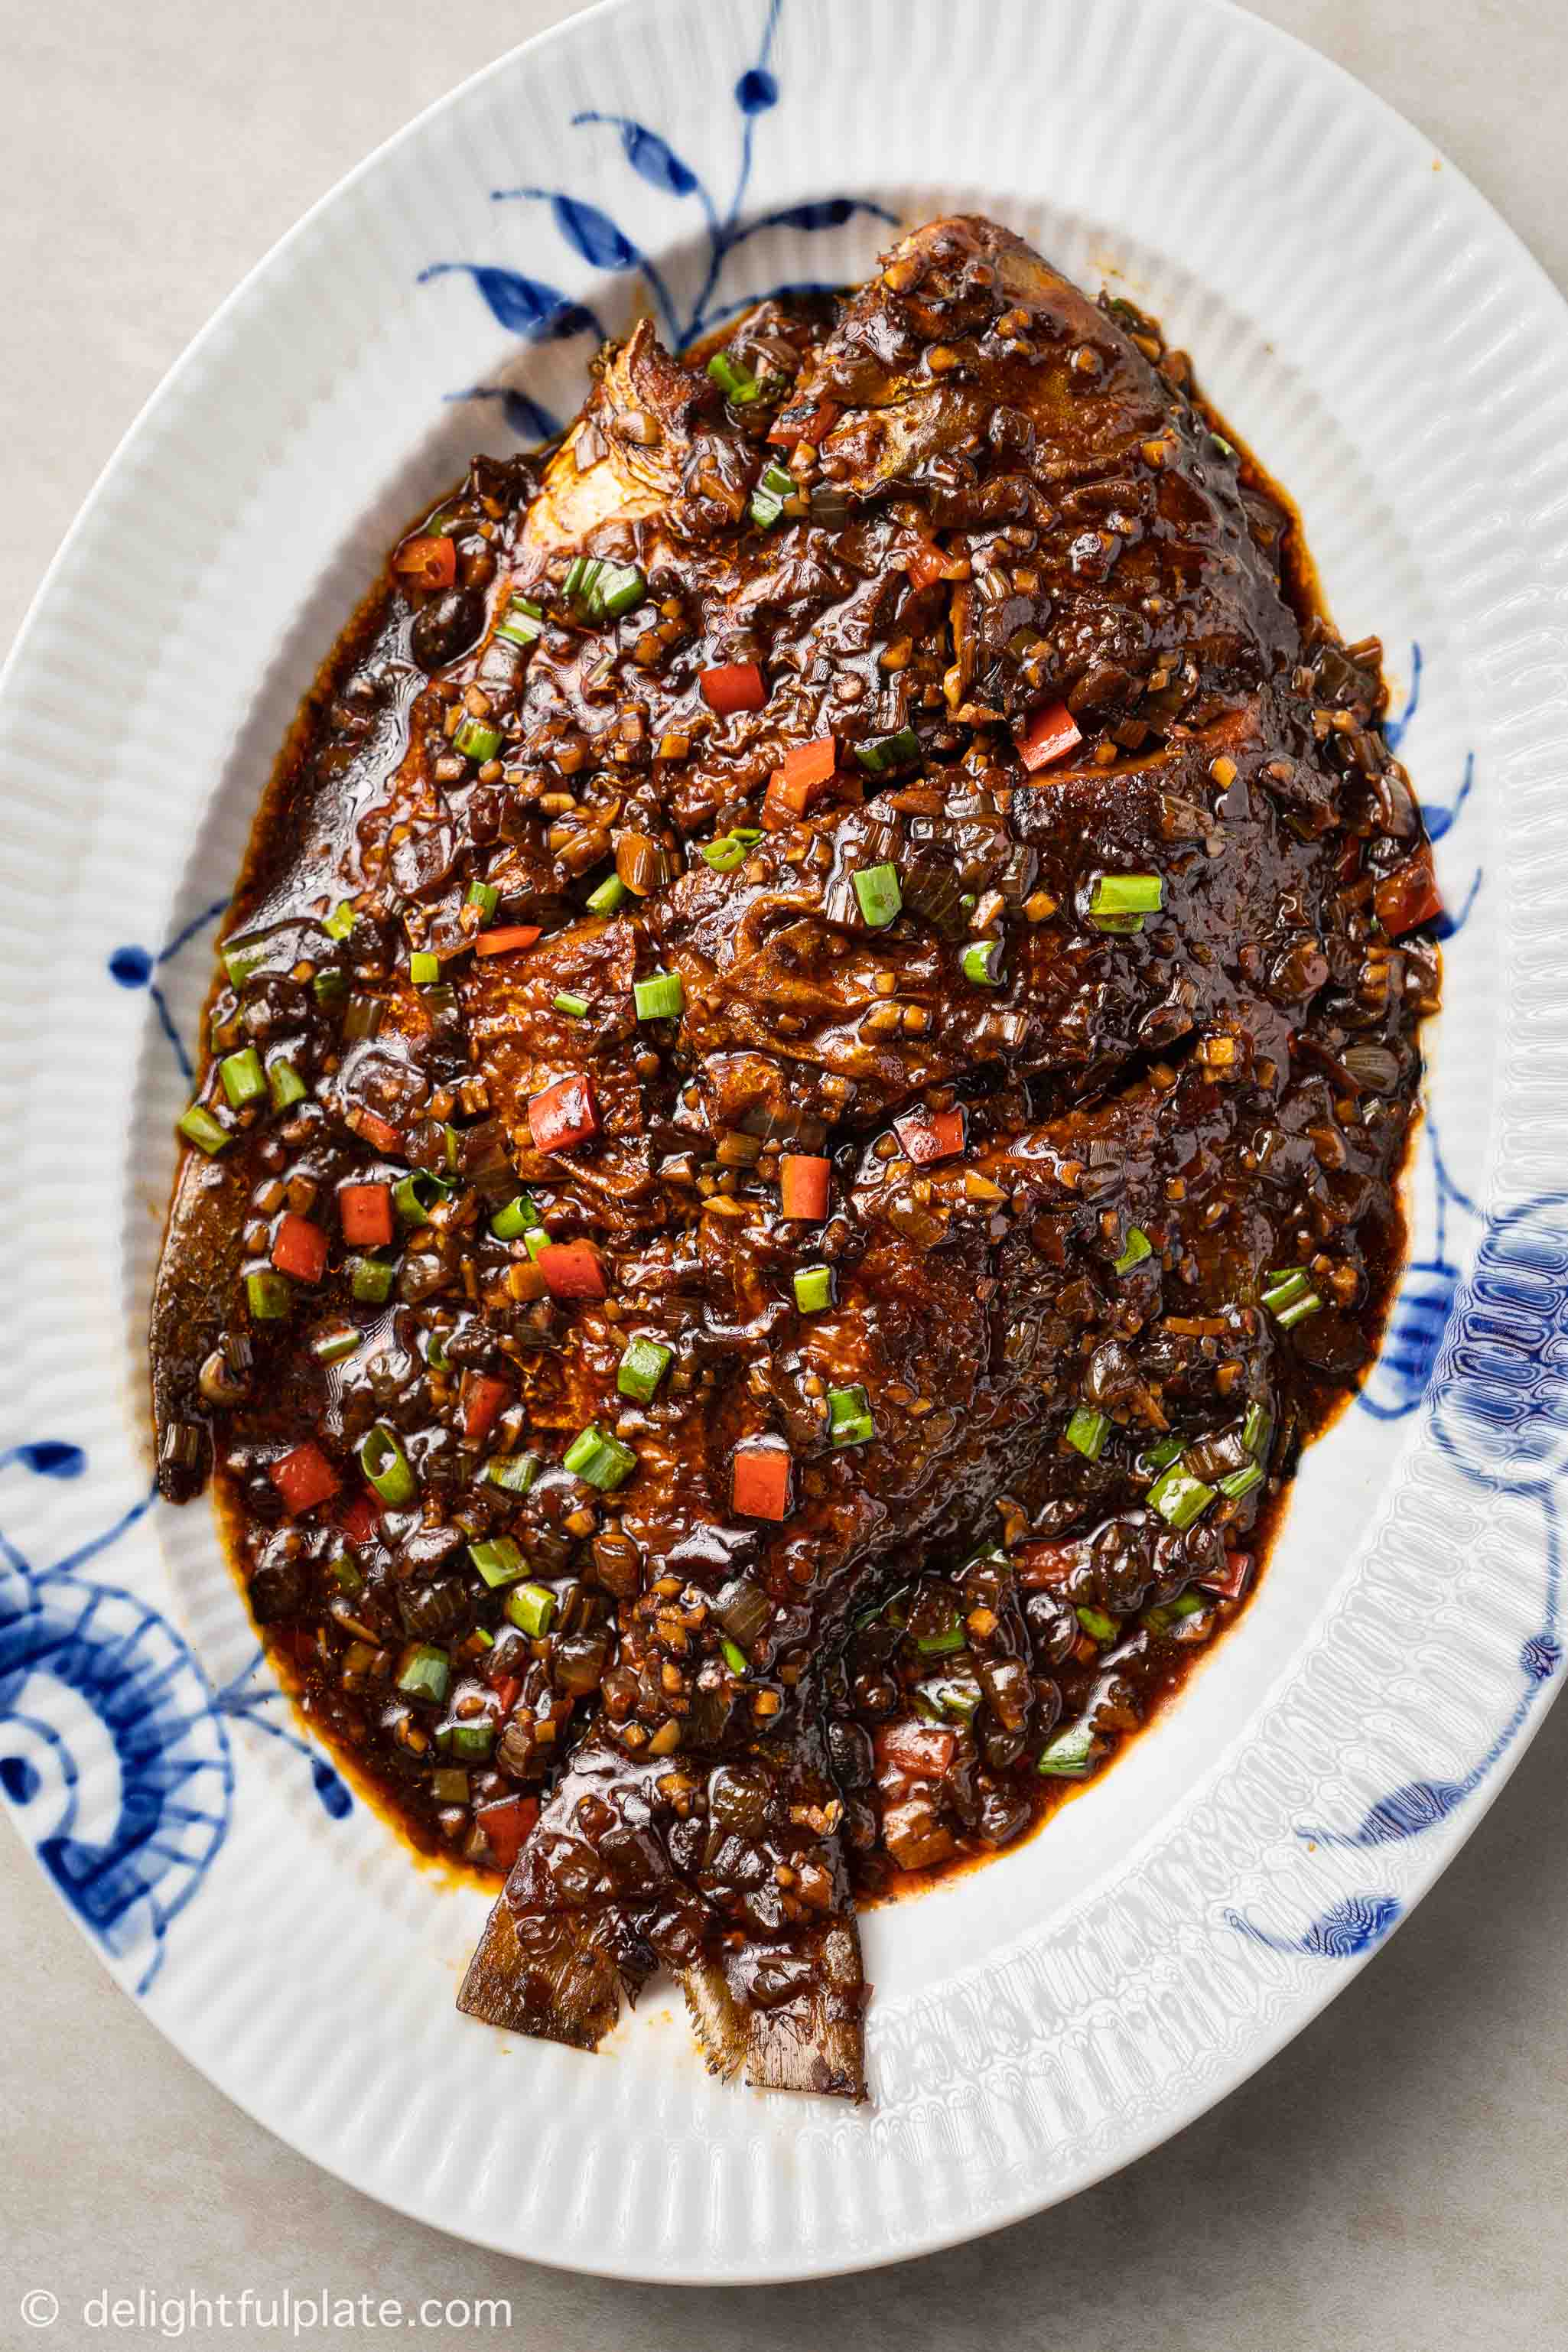 a braised whole fish in Lao Gan Ma sauce on a serving plate